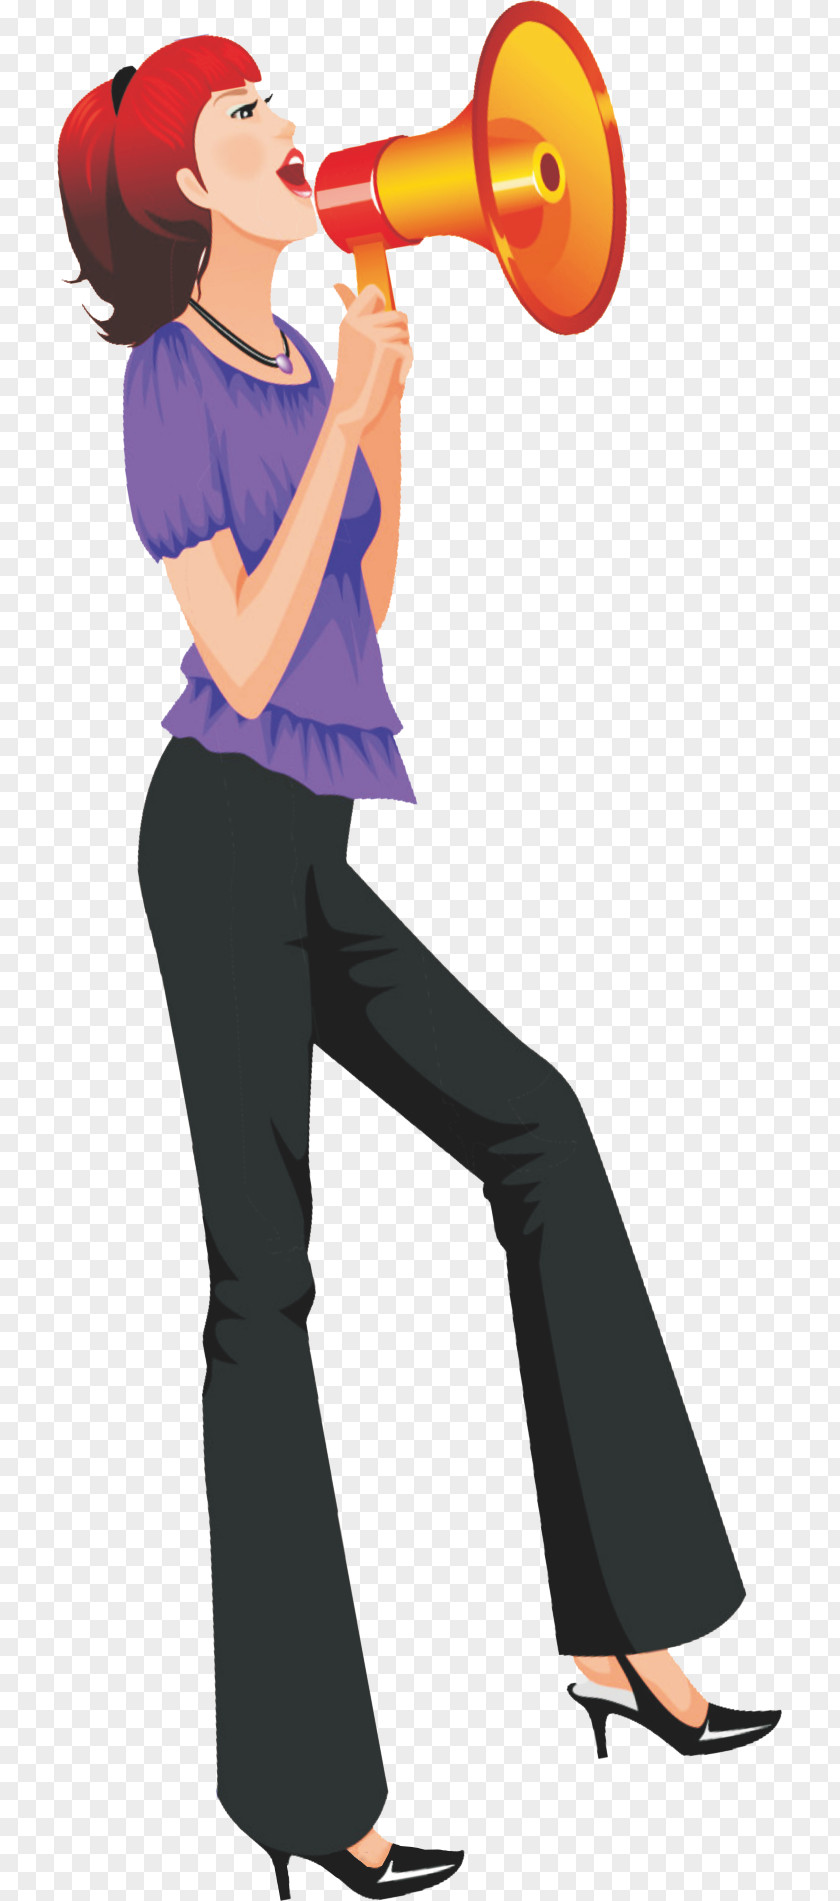 The Woman Took Horn Megaphone Illustration PNG